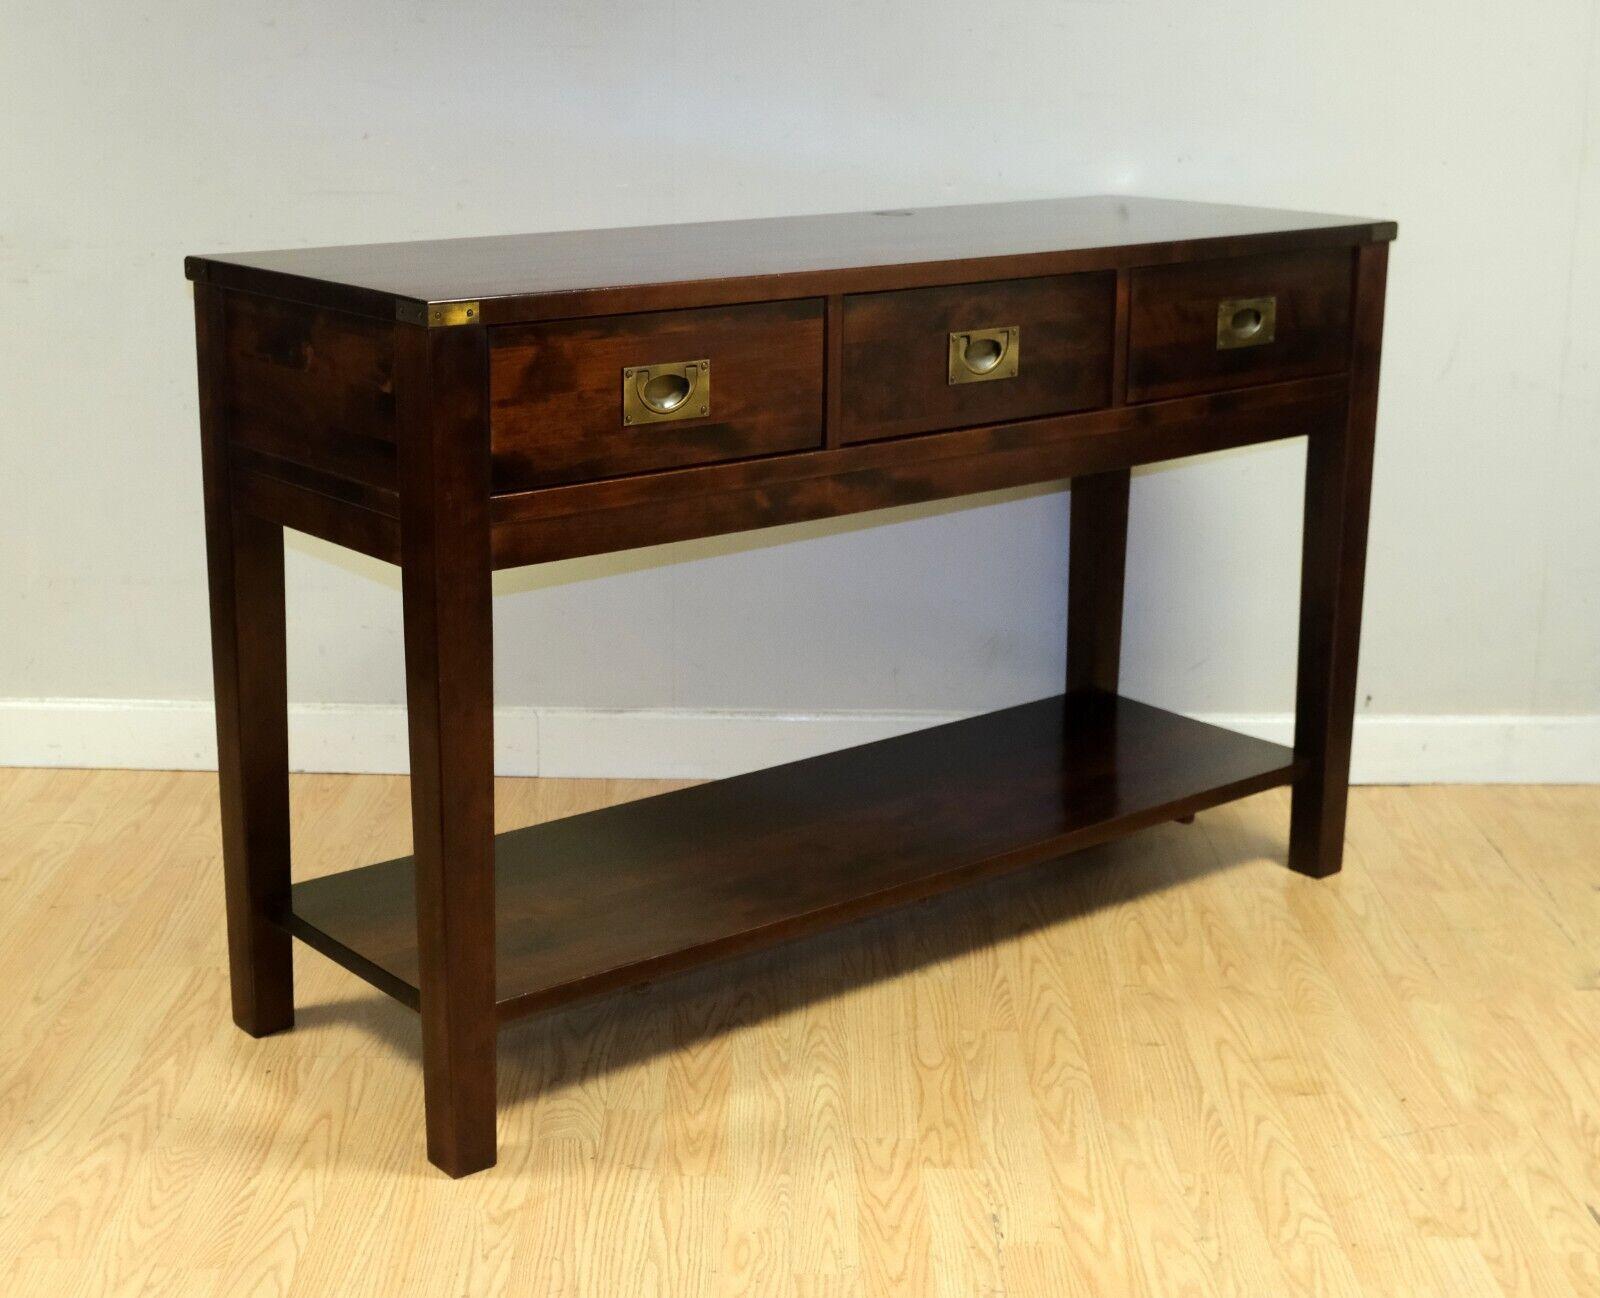 We are delighted to offer for sale this lovely Laura Ashley Chaldon range birch campaign style sideboard/console table. 

This piece draws inspiration from traditional period furniture with its campaign style and solid construction. It compromises